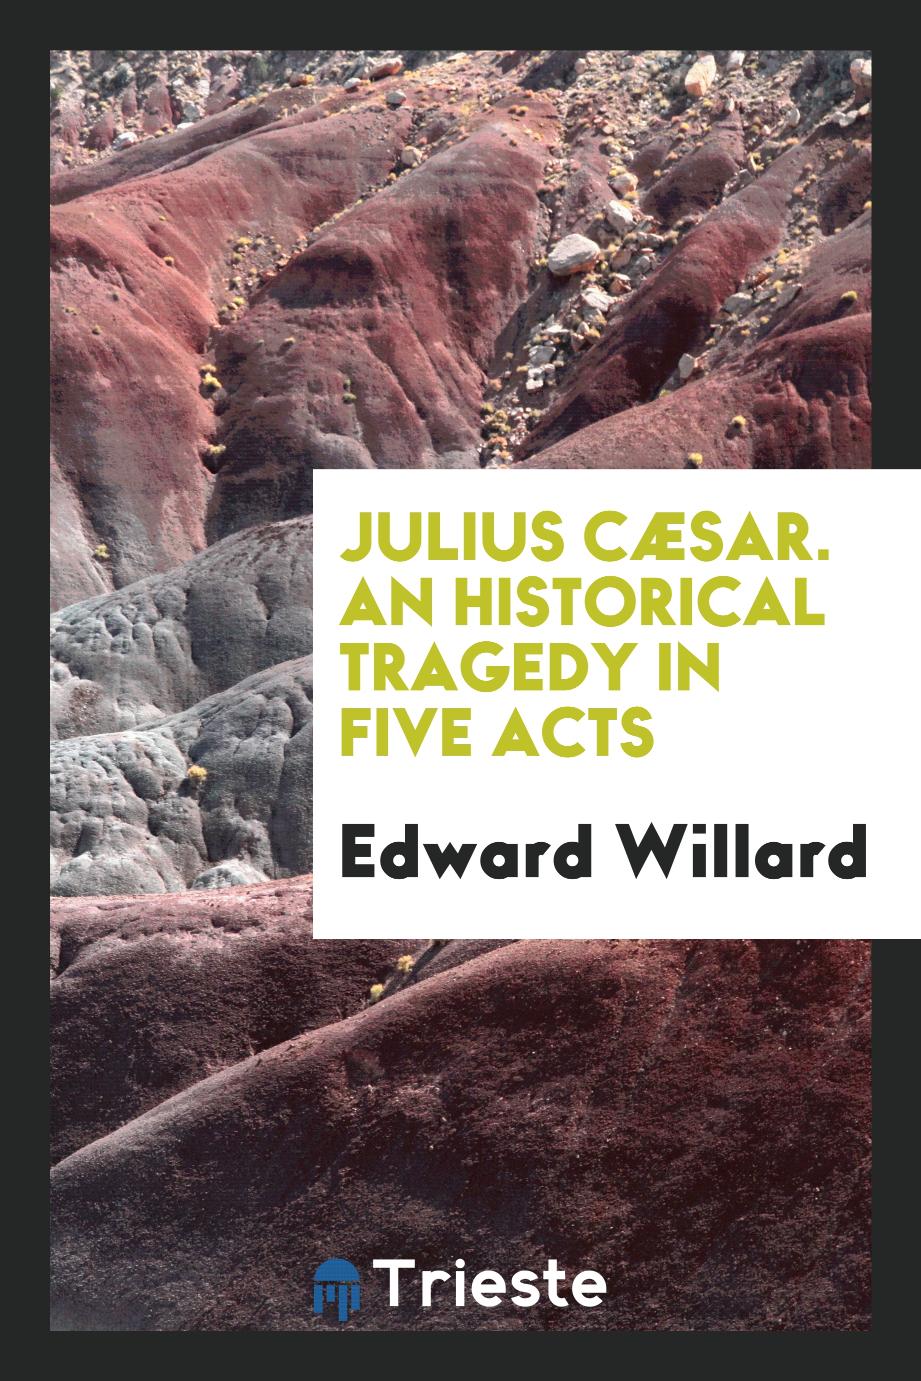 Julius Cæsar. An Historical Tragedy in Five Acts